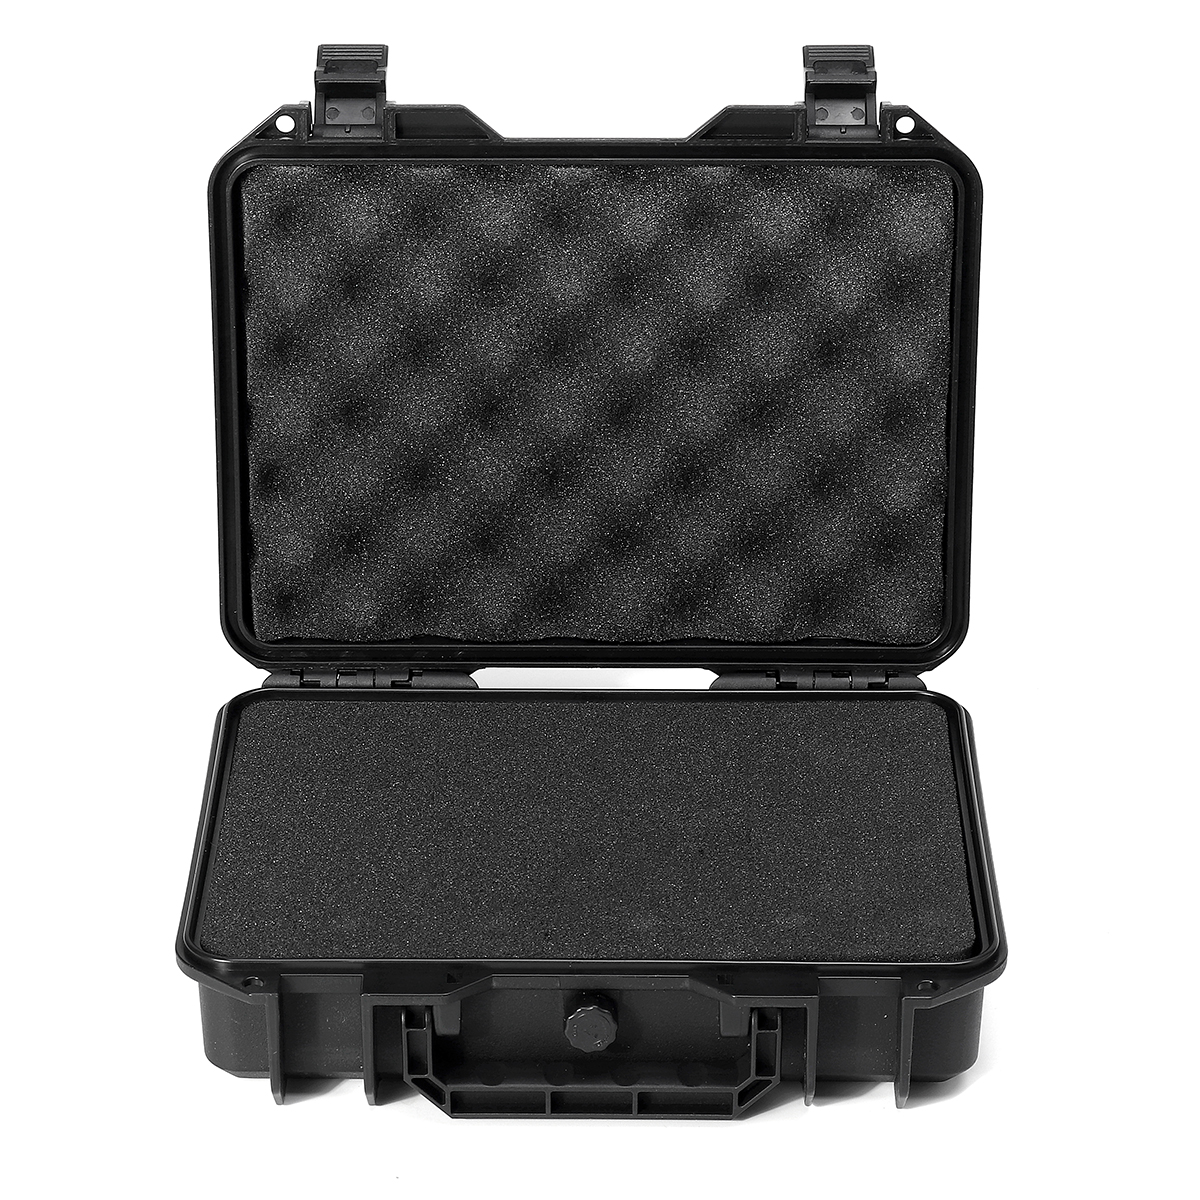 Waterproof-Hard-Carrying-Case-Bag-Tool-Storage-Box-Camera-Photography-with-Sponge-1664833-4